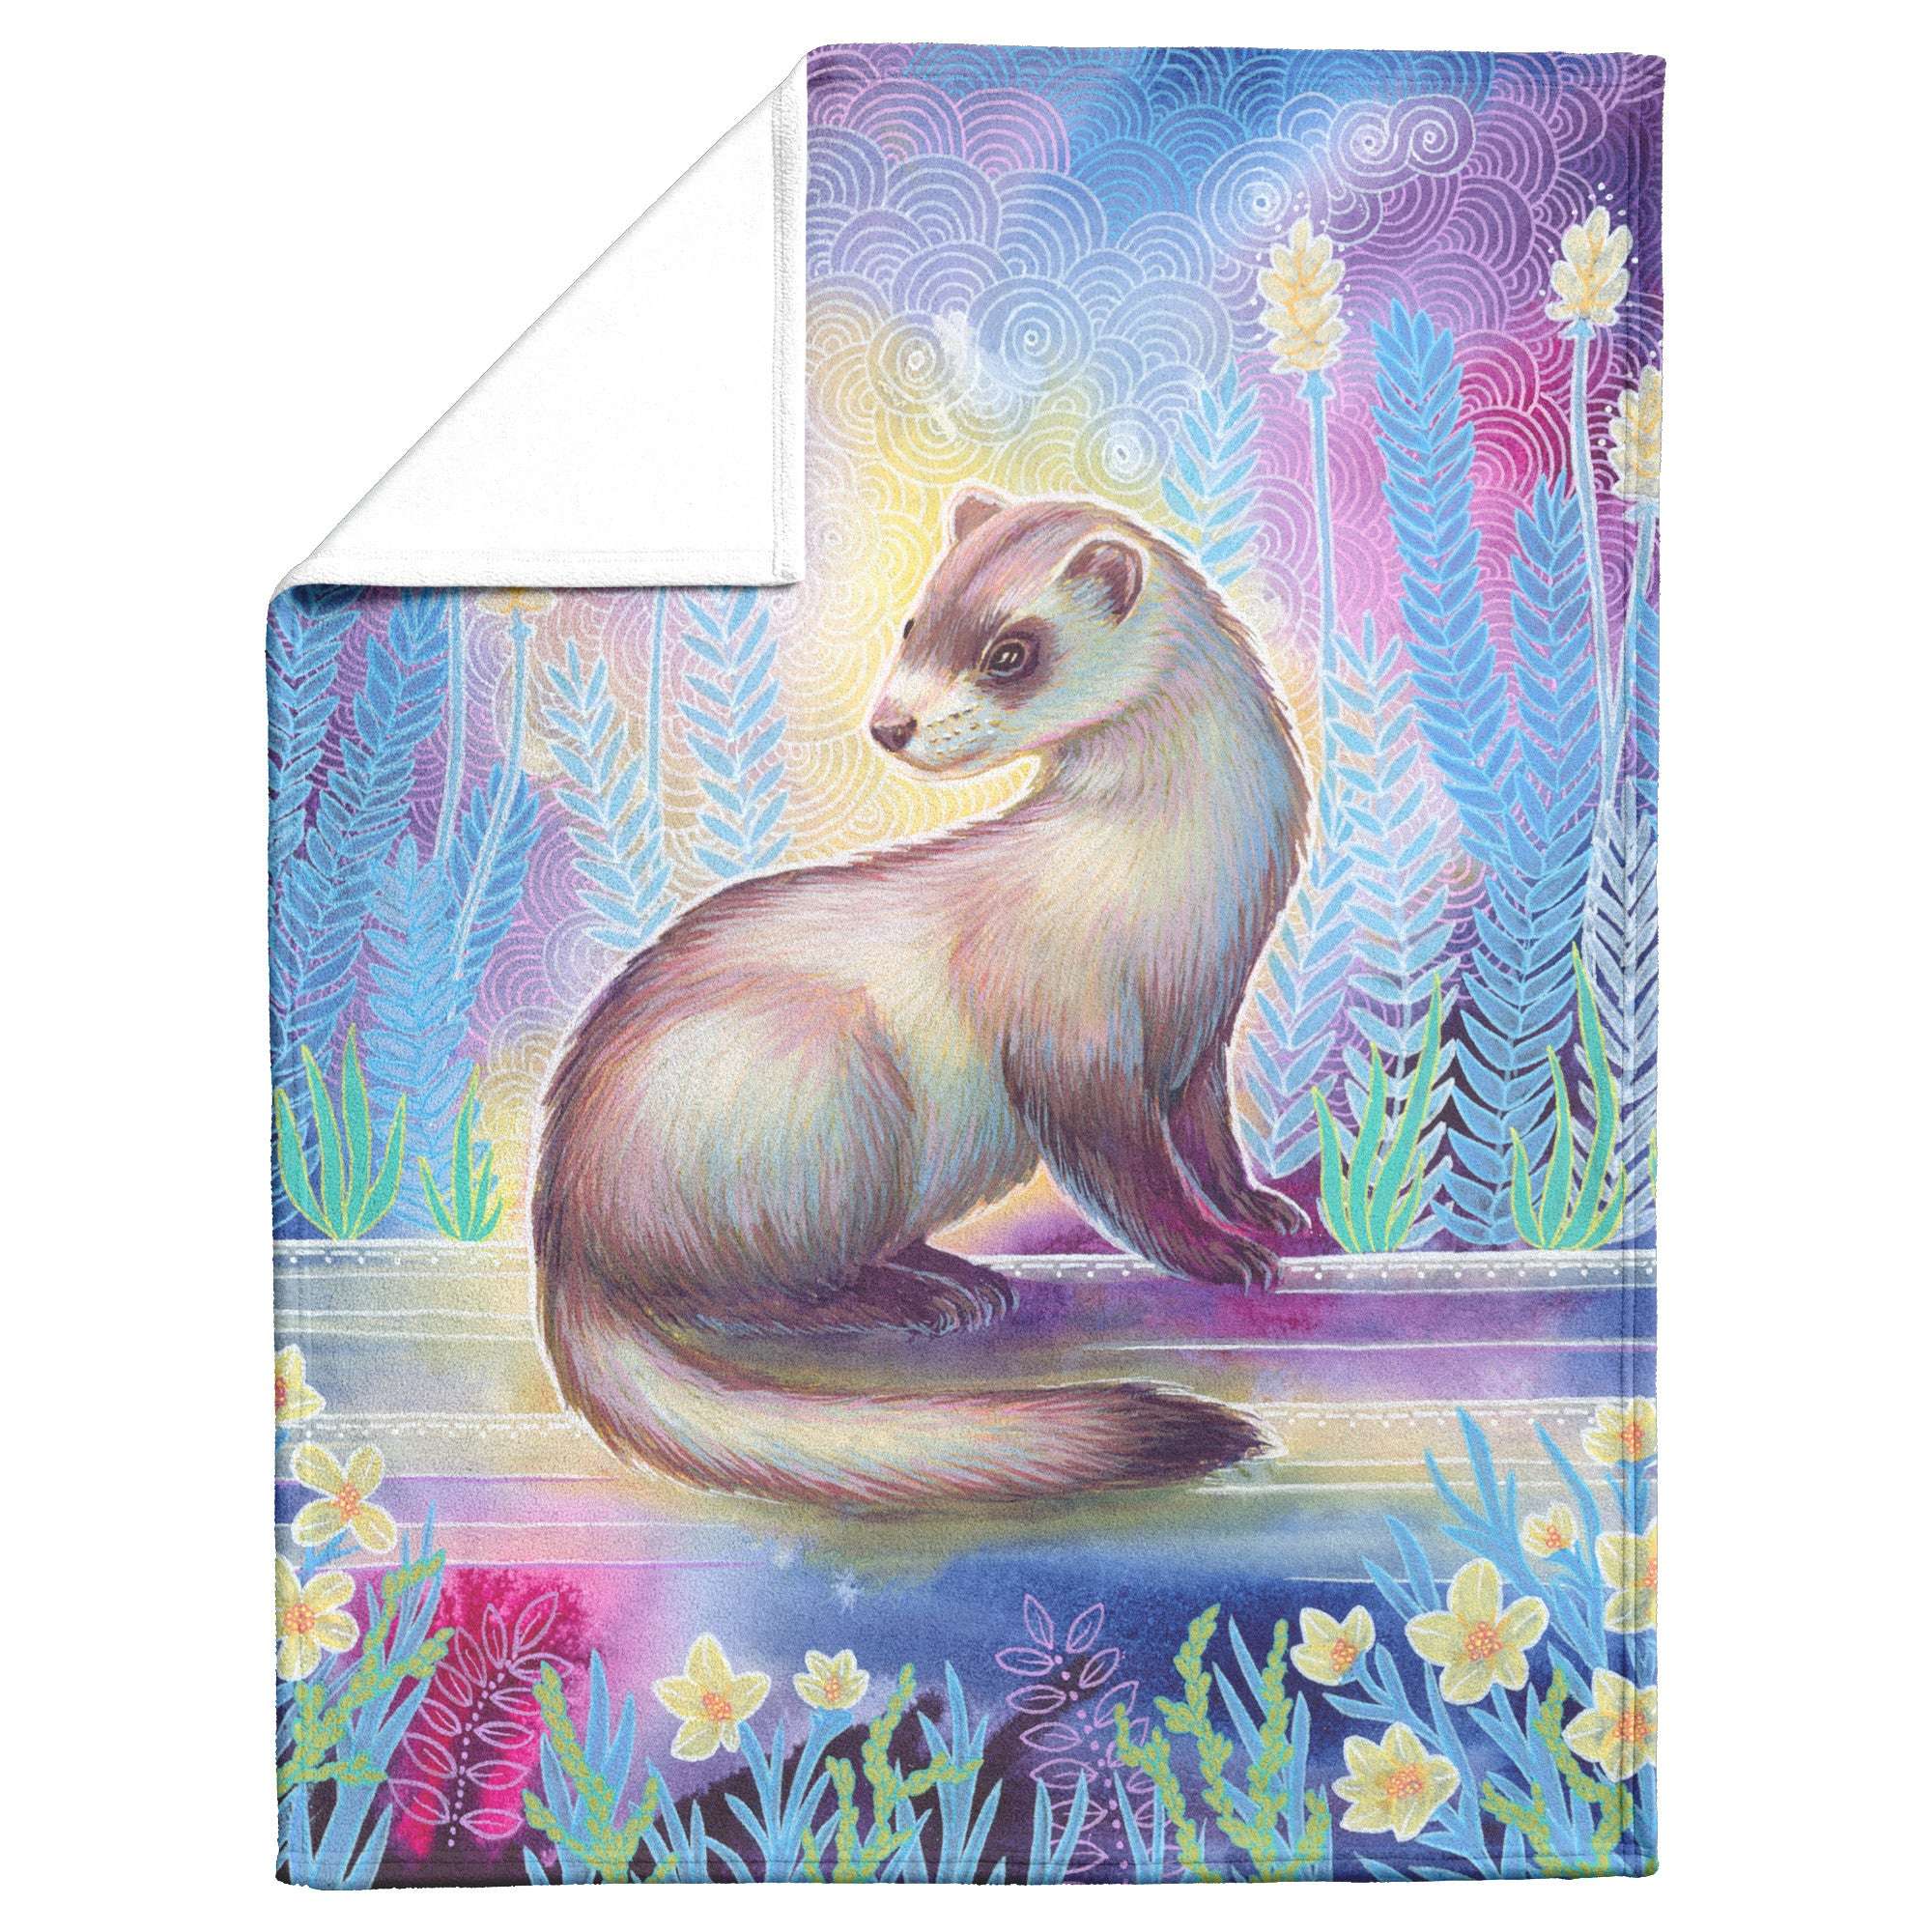 An illustrated Ferret Blanket featuring a stylized painting of a ferret sitting under a swirling sky with stylized flowers and patterns.